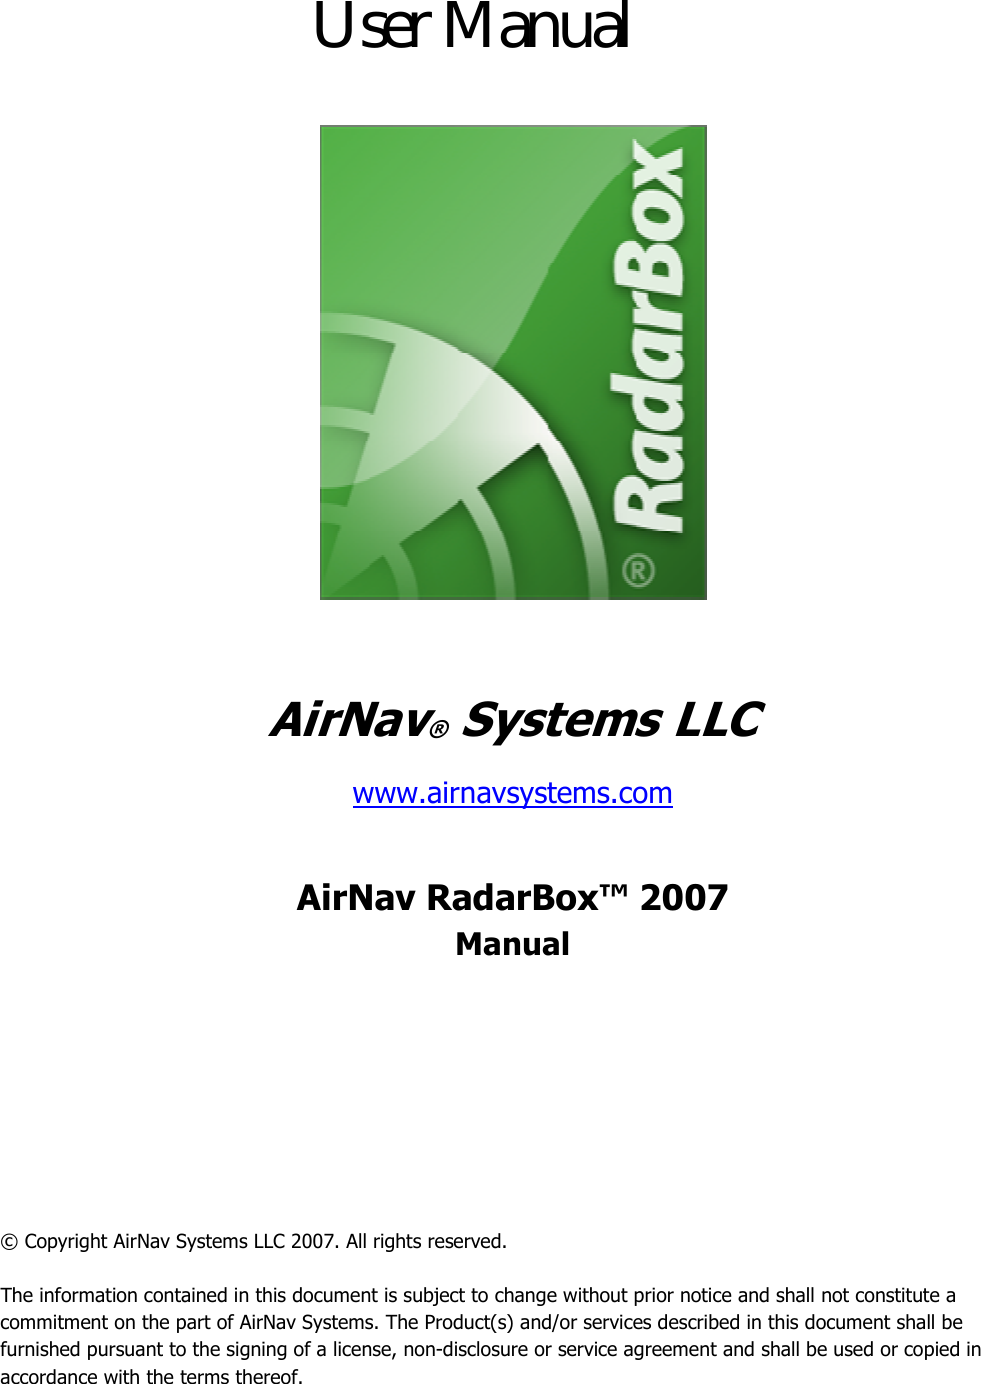        AirNav® Systems LLC www.airnavsystems.com  AirNav RadarBox™ 2007 Manual       © Copyright AirNav Systems LLC 2007. All rights reserved.  The information contained in this document is subject to change without prior notice and shall not constitute a commitment on the part of AirNav Systems. The Product(s) and/or services described in this document shall be furnished pursuant to the signing of a license, non-disclosure or service agreement and shall be used or copied in accordance with the terms thereof. User Manual